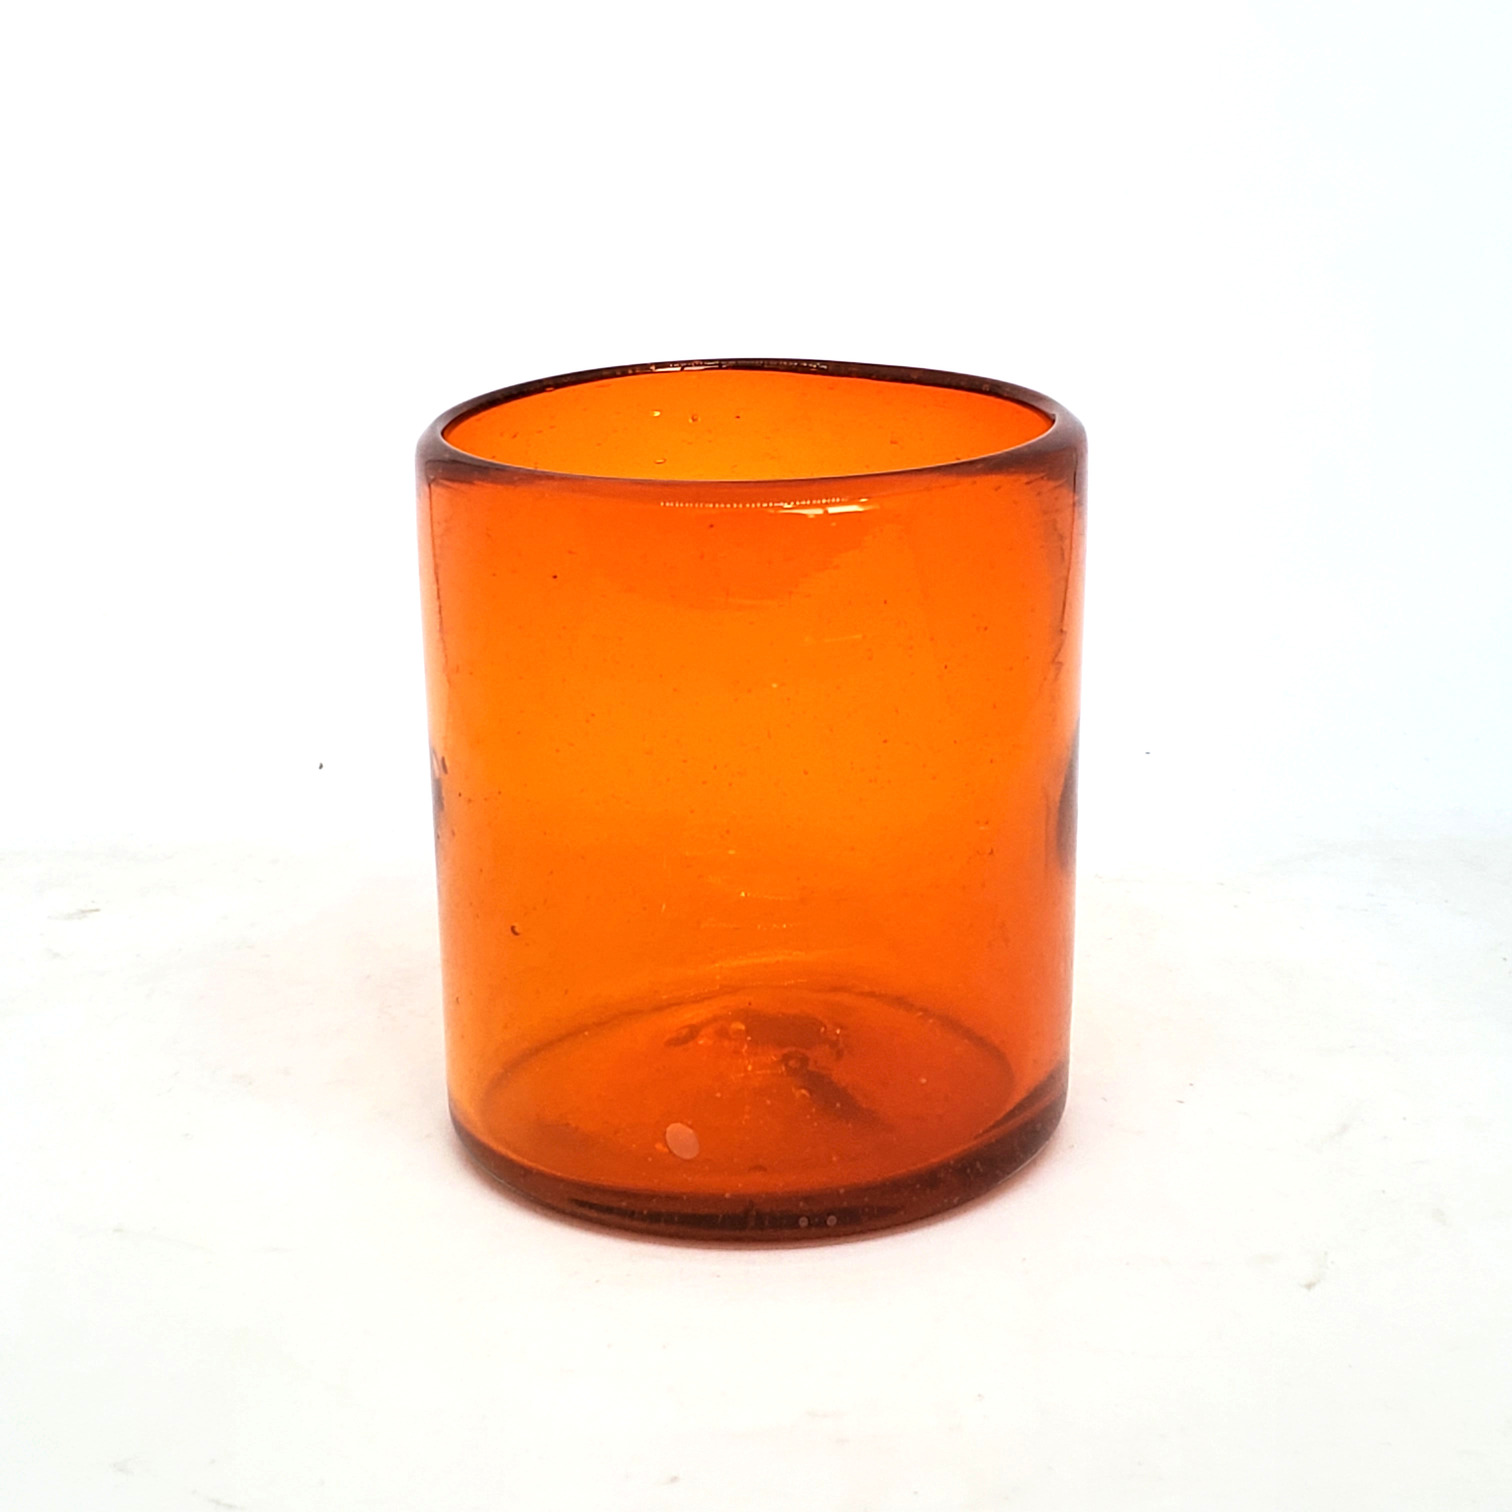 Colored Glassware / Solid Orange 9 oz Short Tumblers (set of 6) / Enhance your favorite drink with these colorful handcrafted glasses.